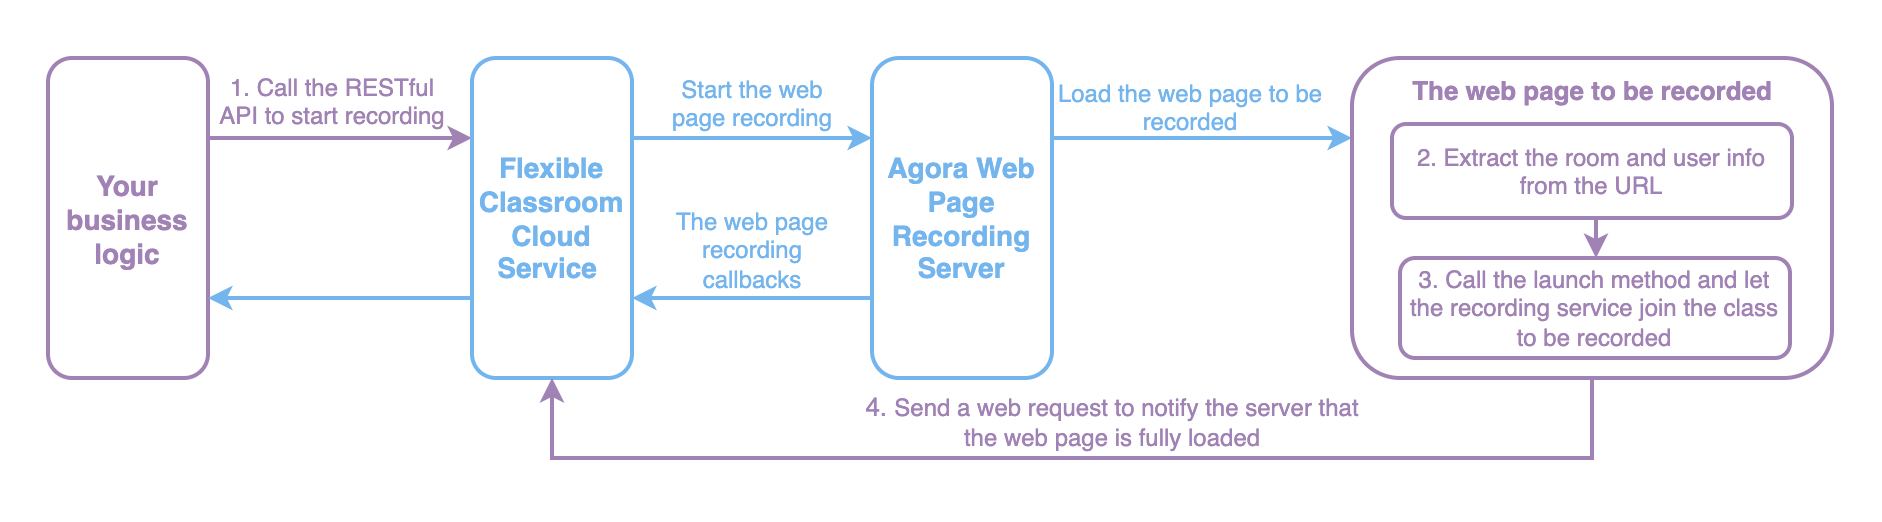 implement recording on your own